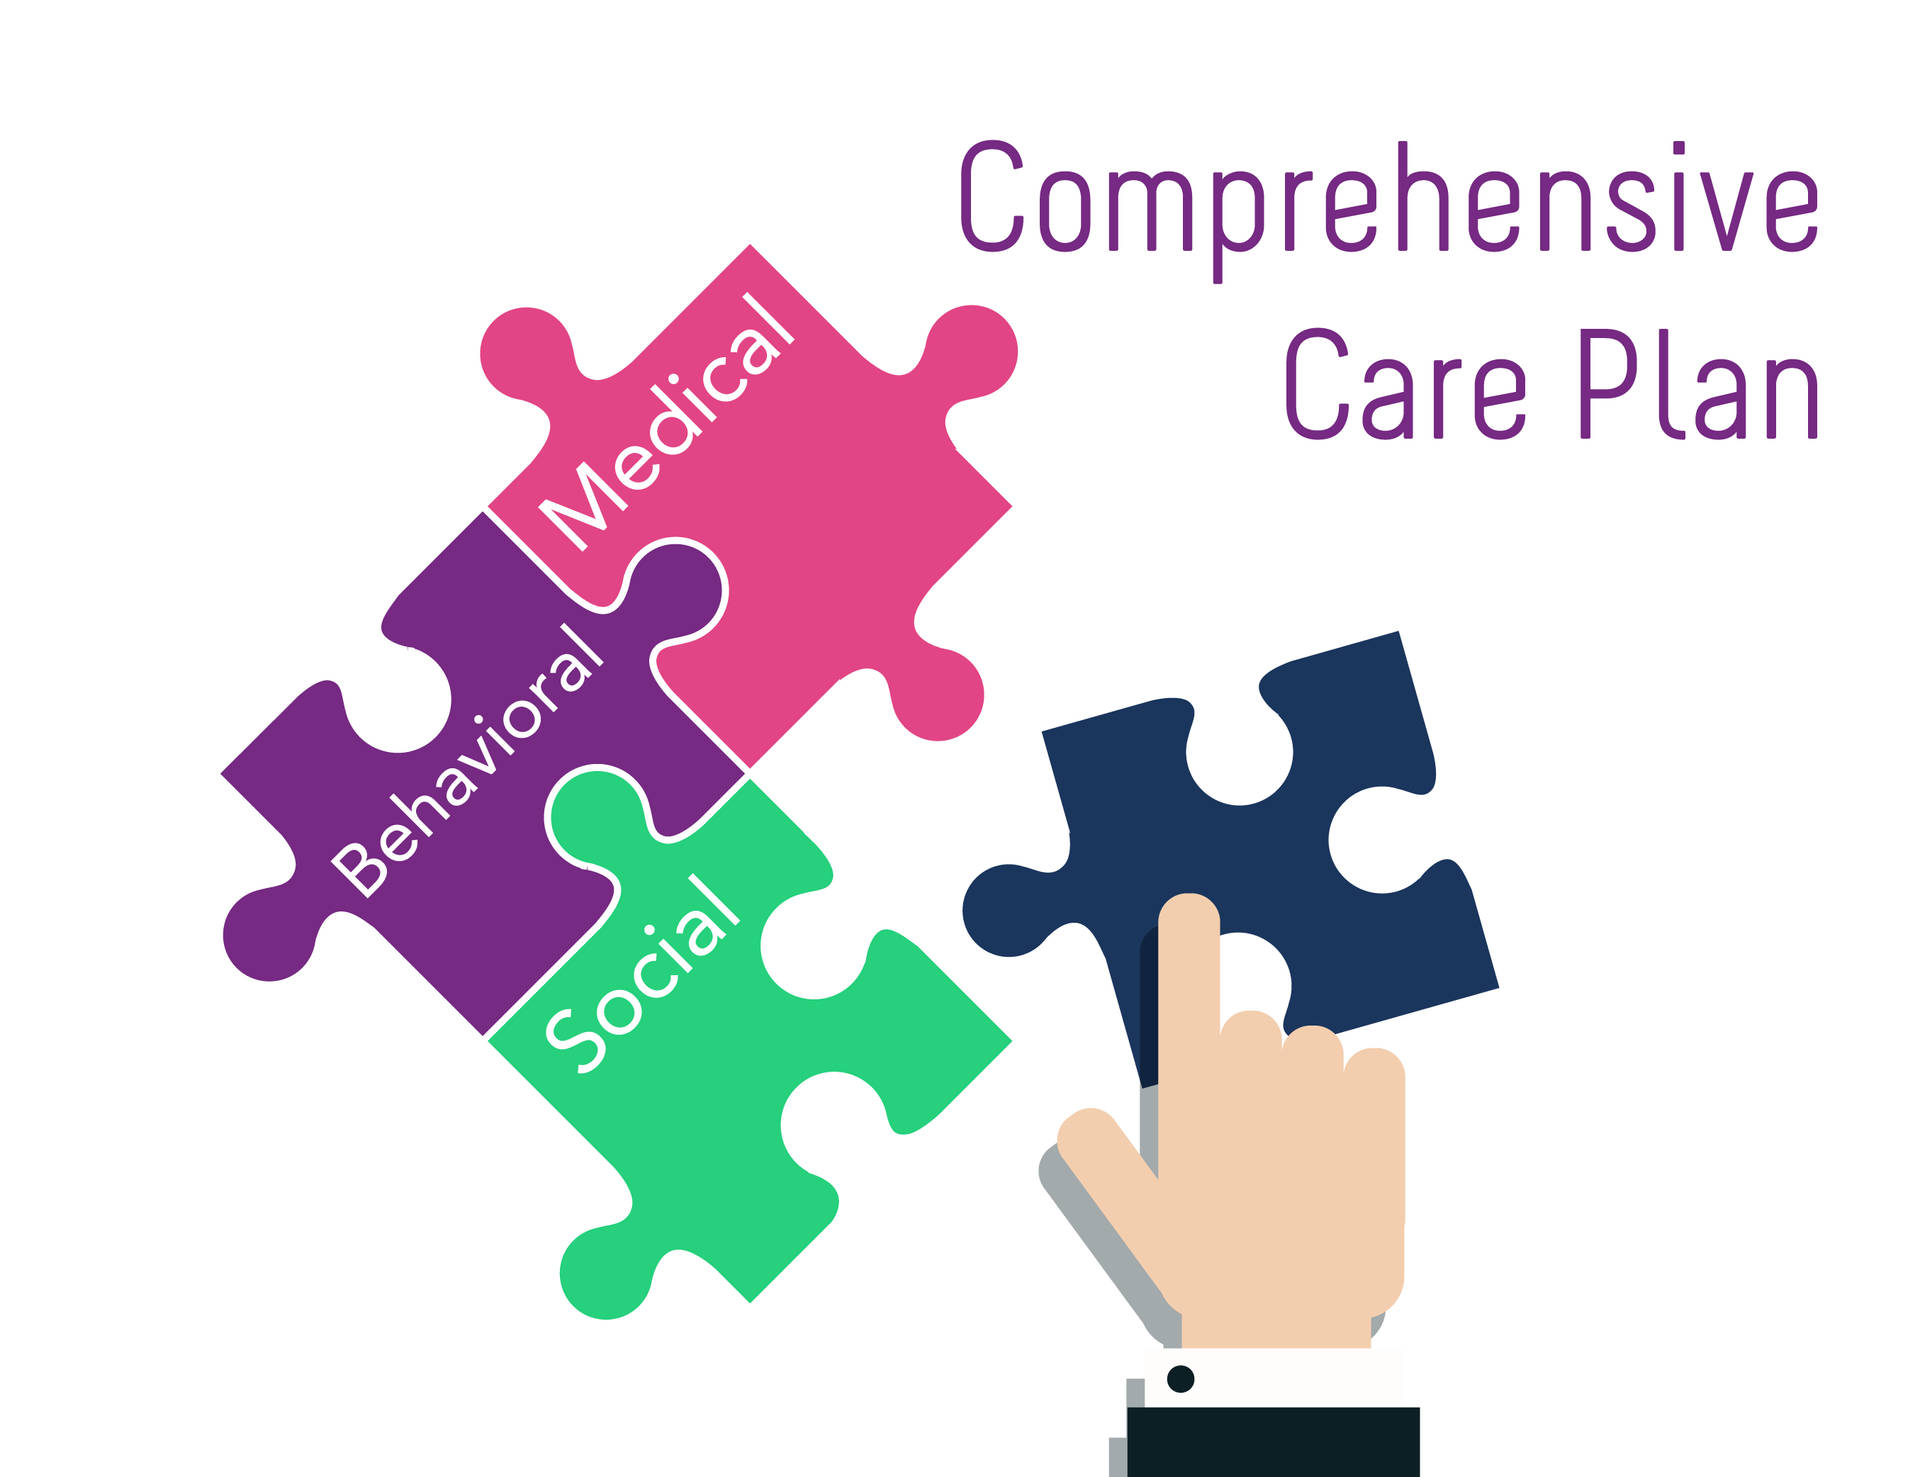 Comprehensive Care Plan Infographic Background